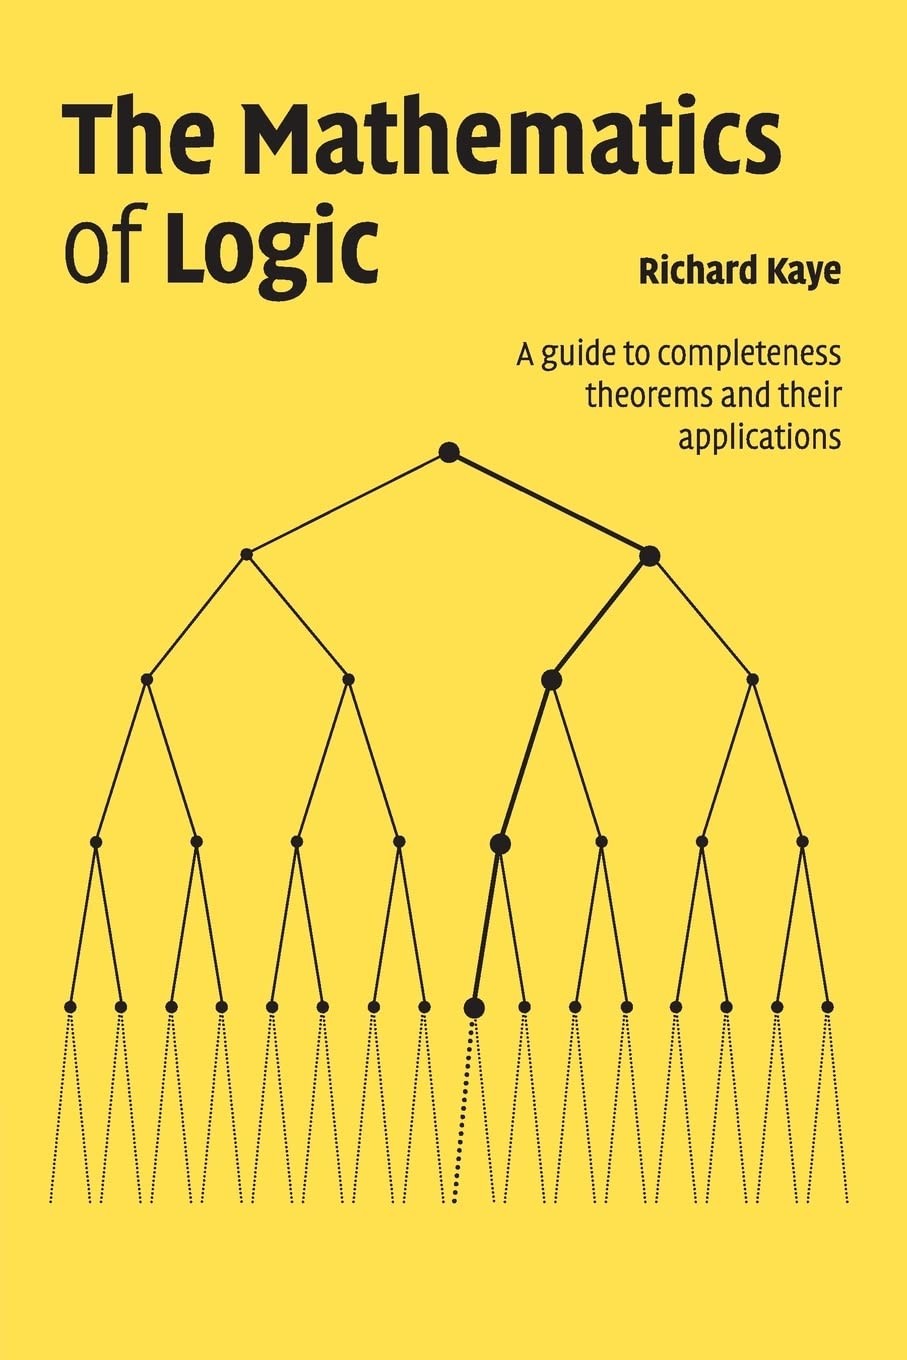 The Mathematics of Logic: A Guide to Completeness Theorems and Their Applications